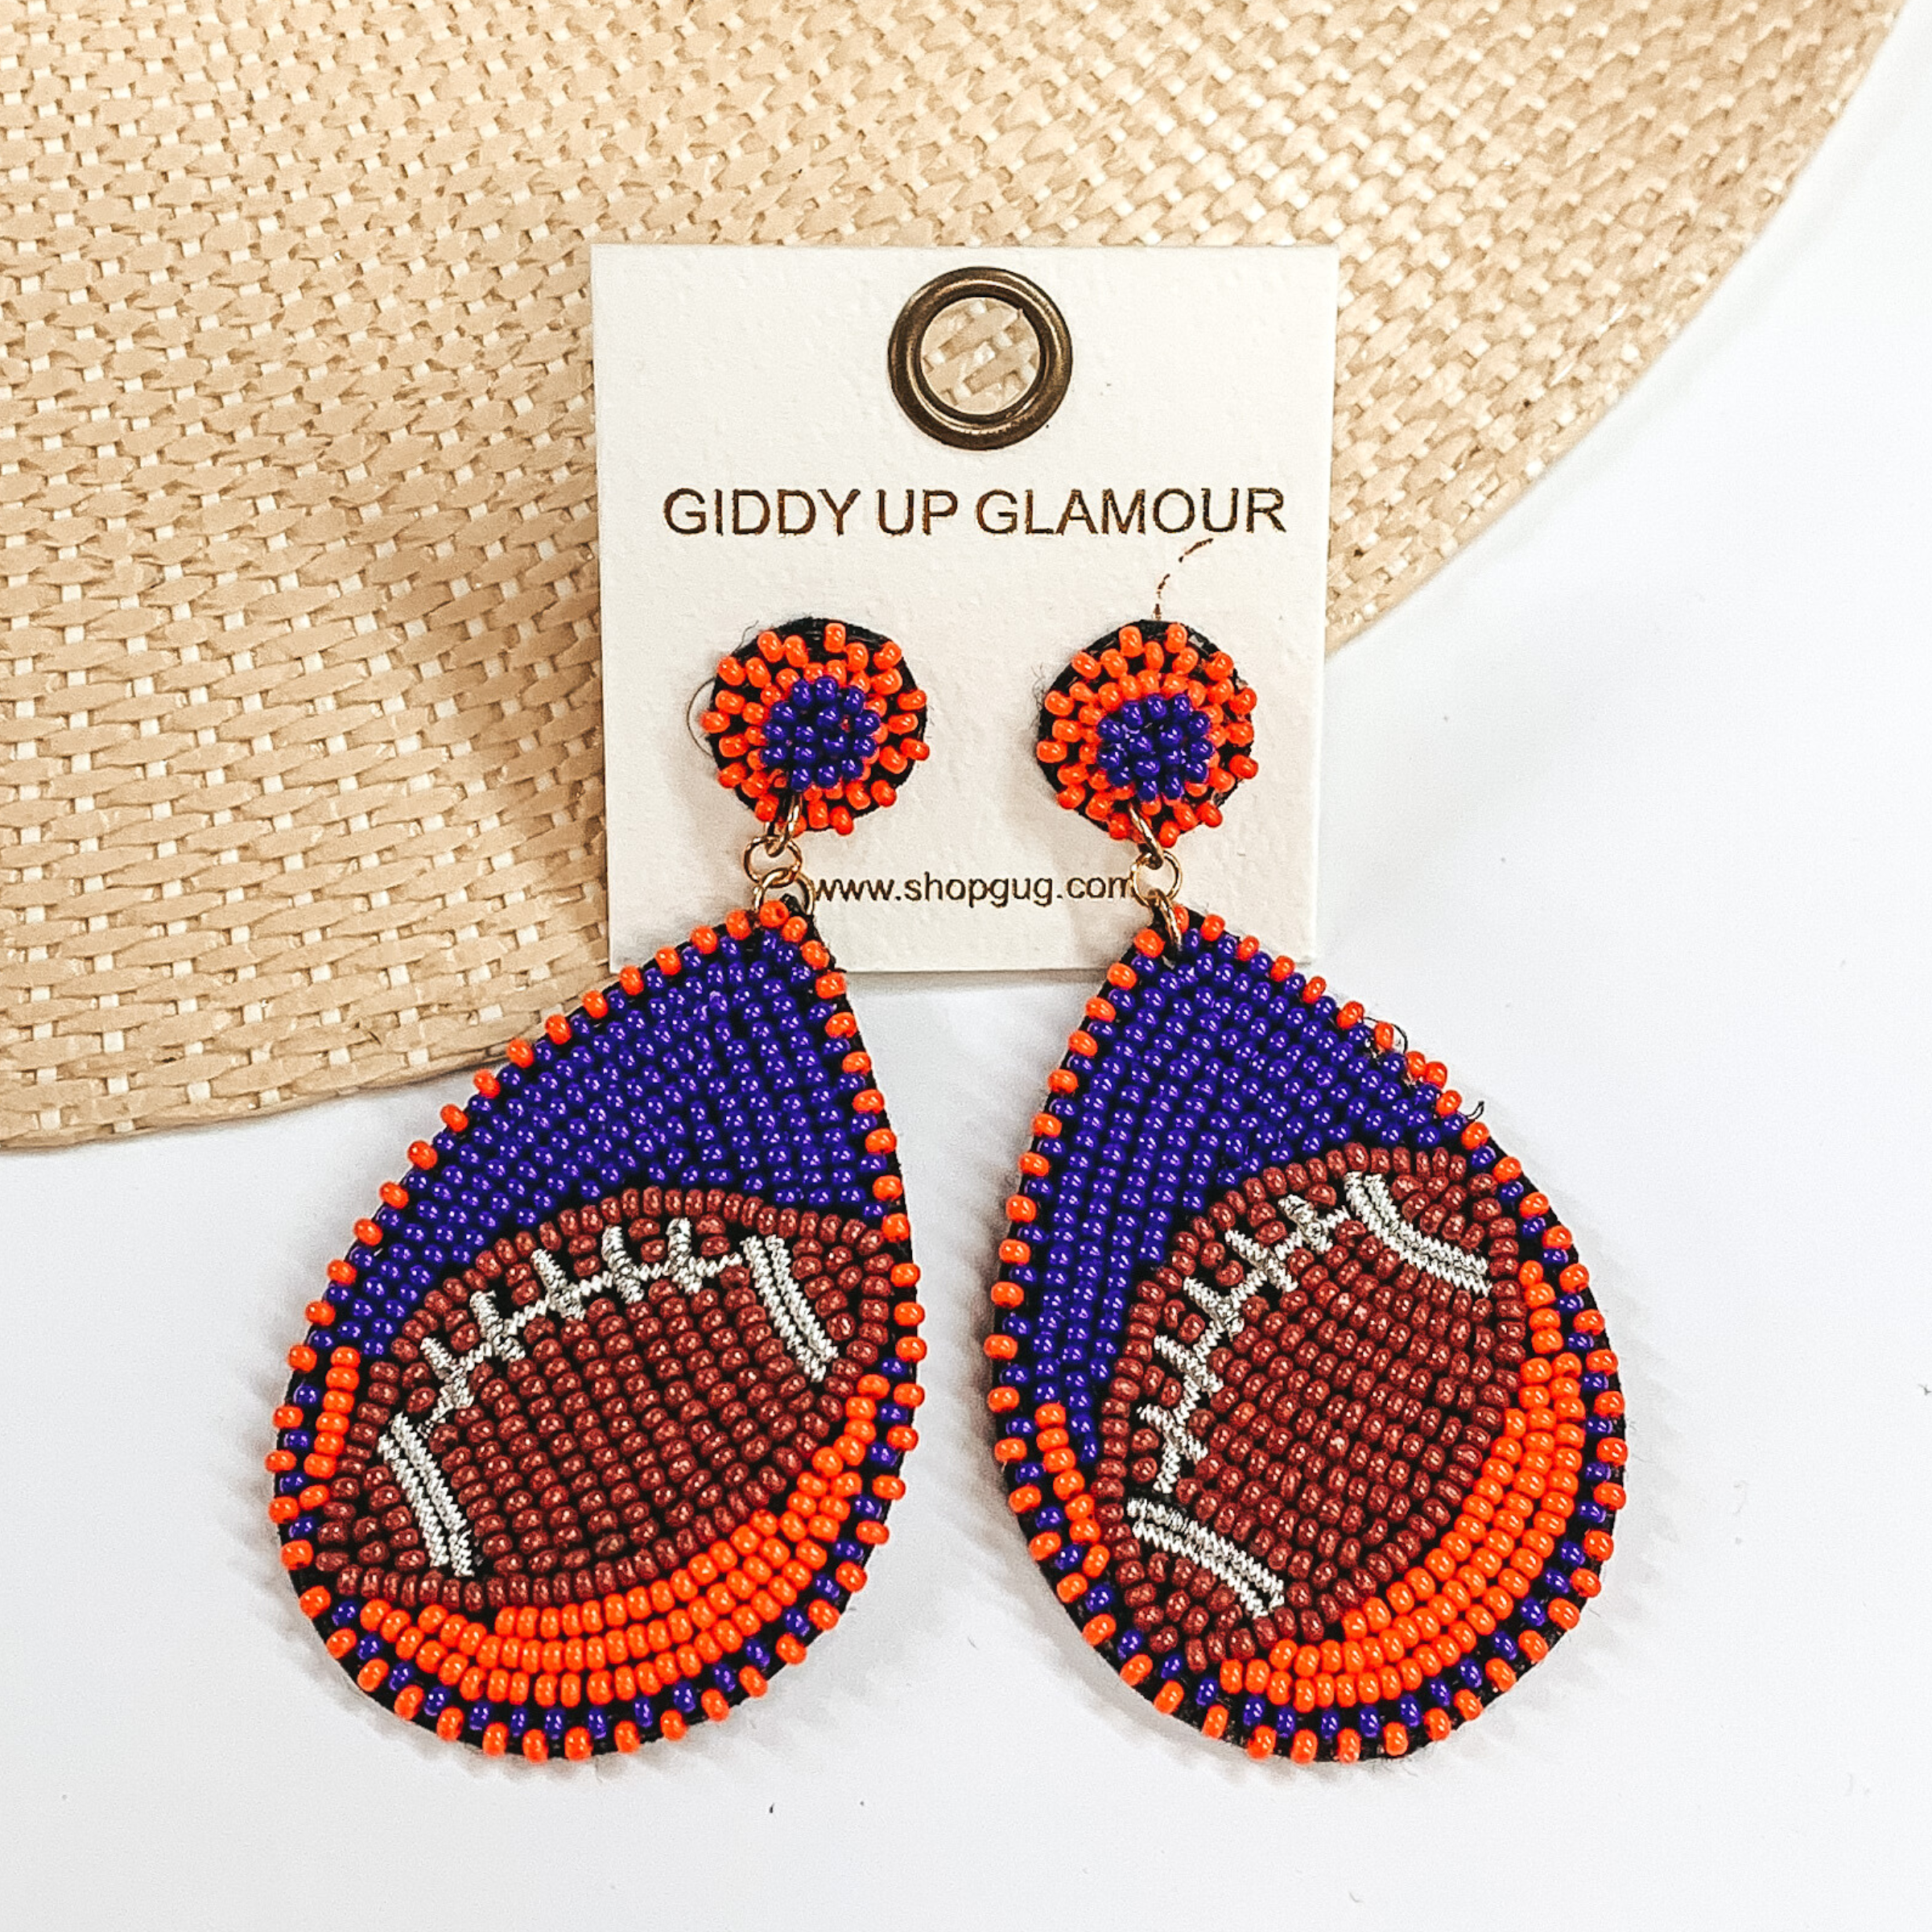 Pictured are a pair of beaded post back earrings with teardrop pendants. These earrings include navy and orange beads with a brown football design. These earrings are pictured laying in a straw hat brim on a white background. 